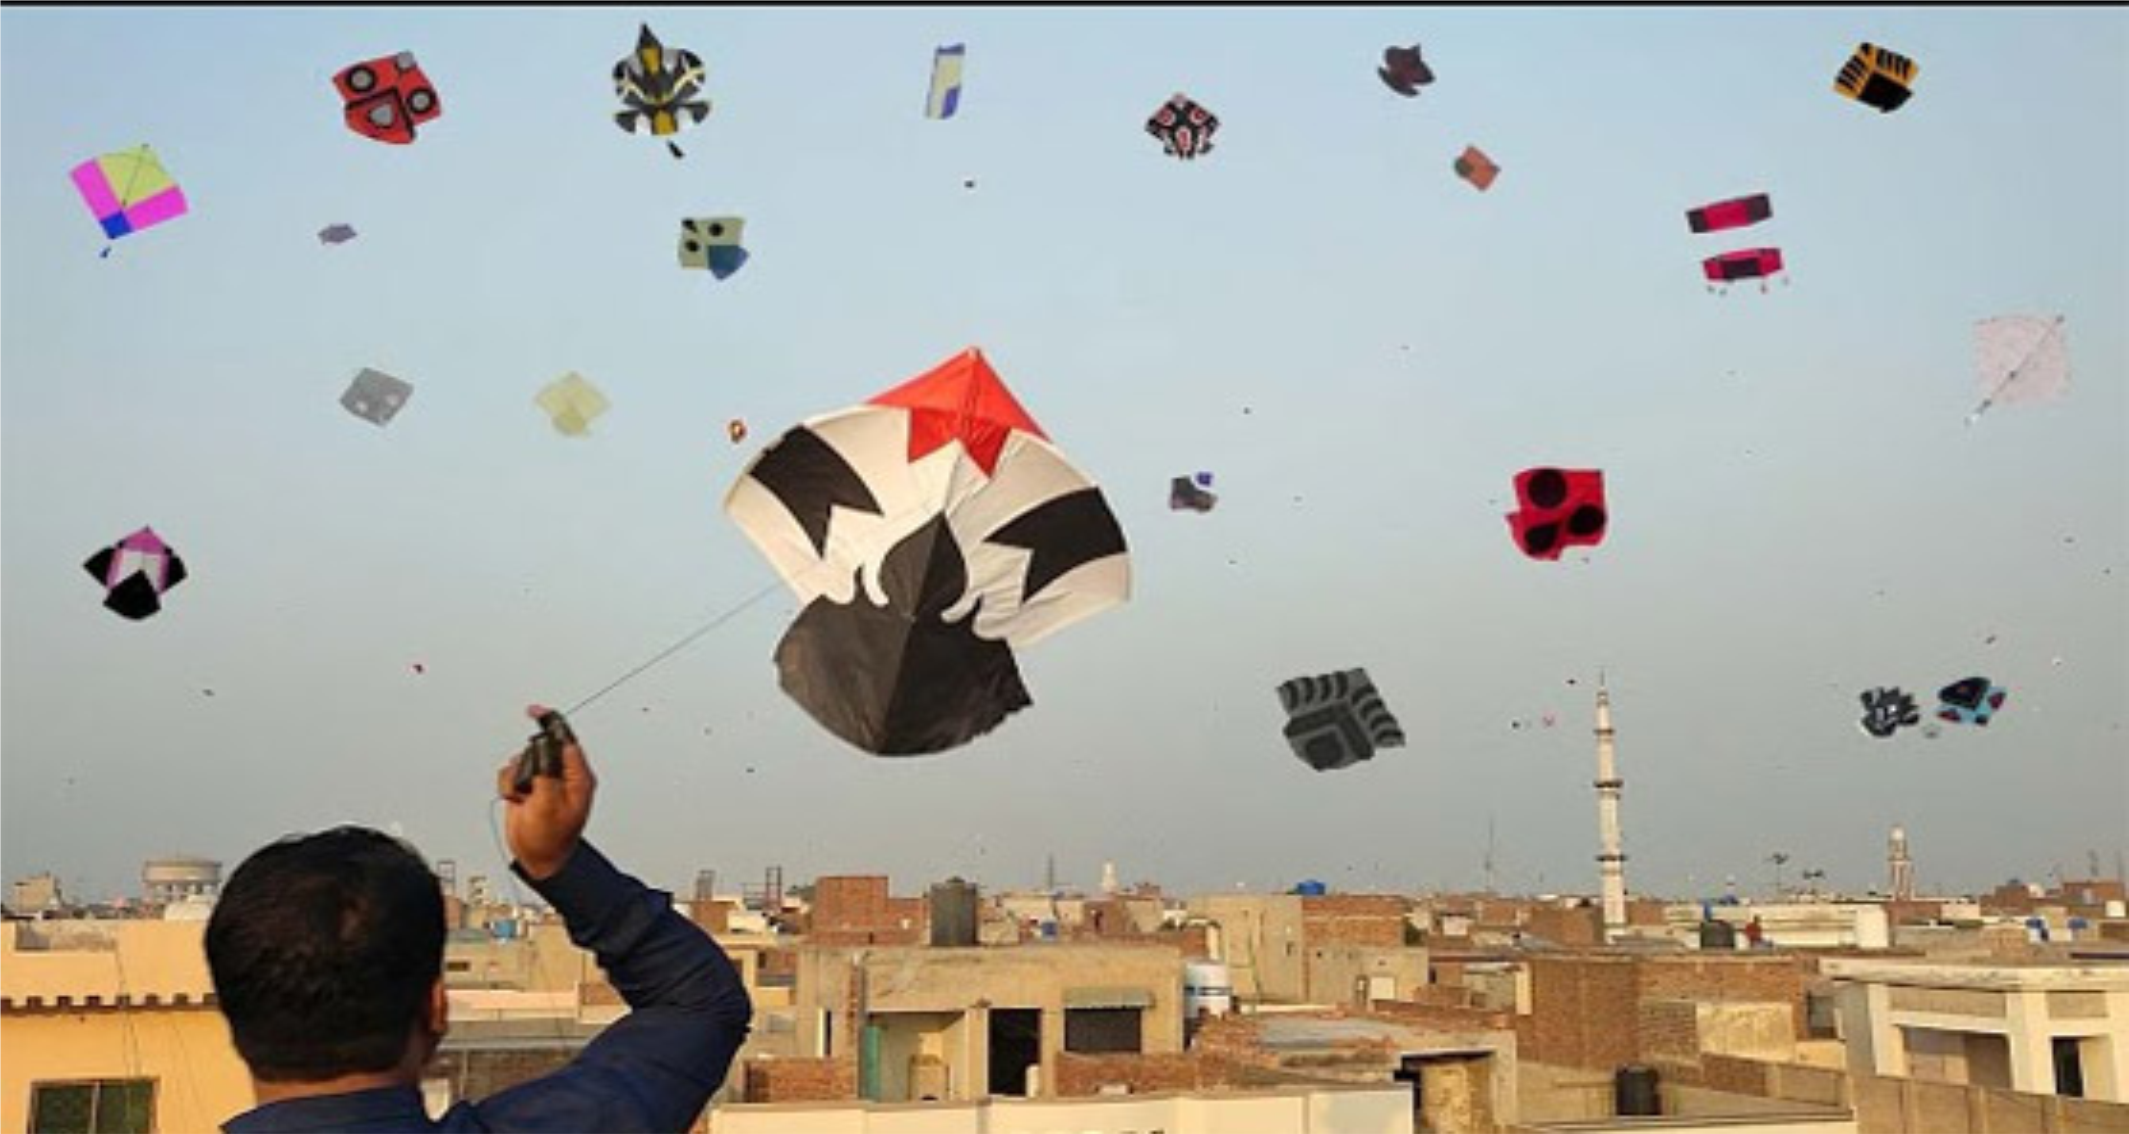 Ban on kite flying in Karachi for two months